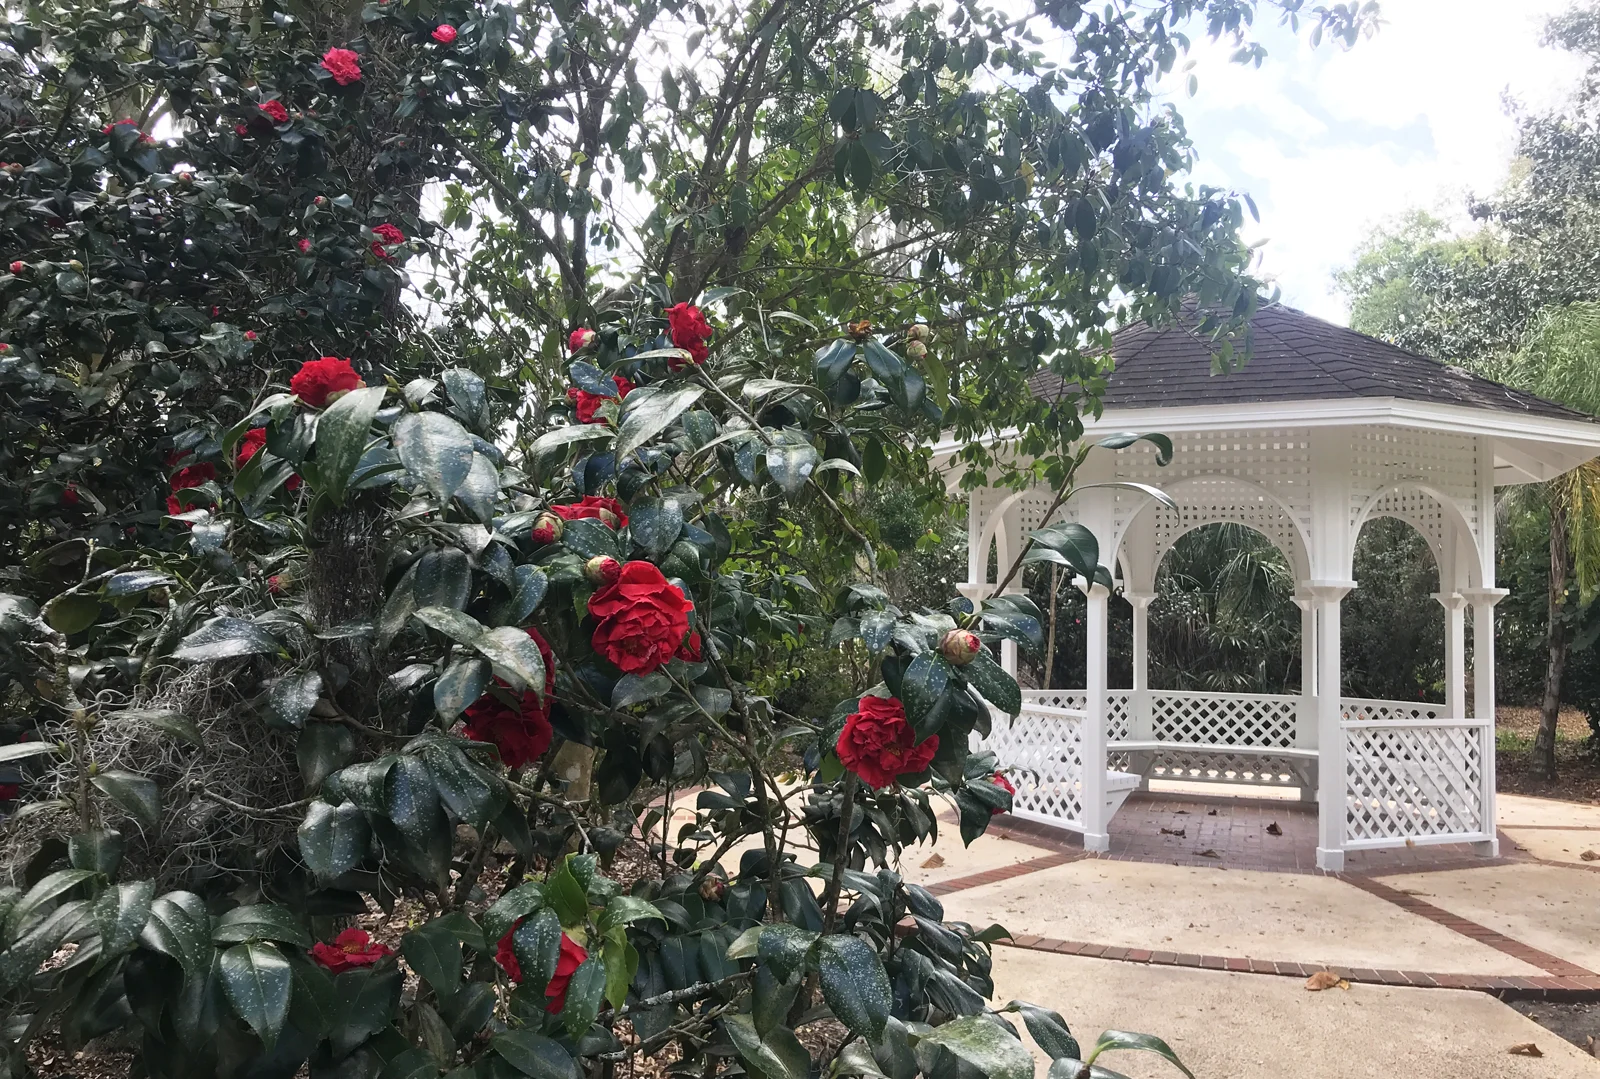 Things to do in Winter Park: Camellias blooming near a gazebo at Harry P. Leu Botanical Gardens (Photo: Bonnie Gross)